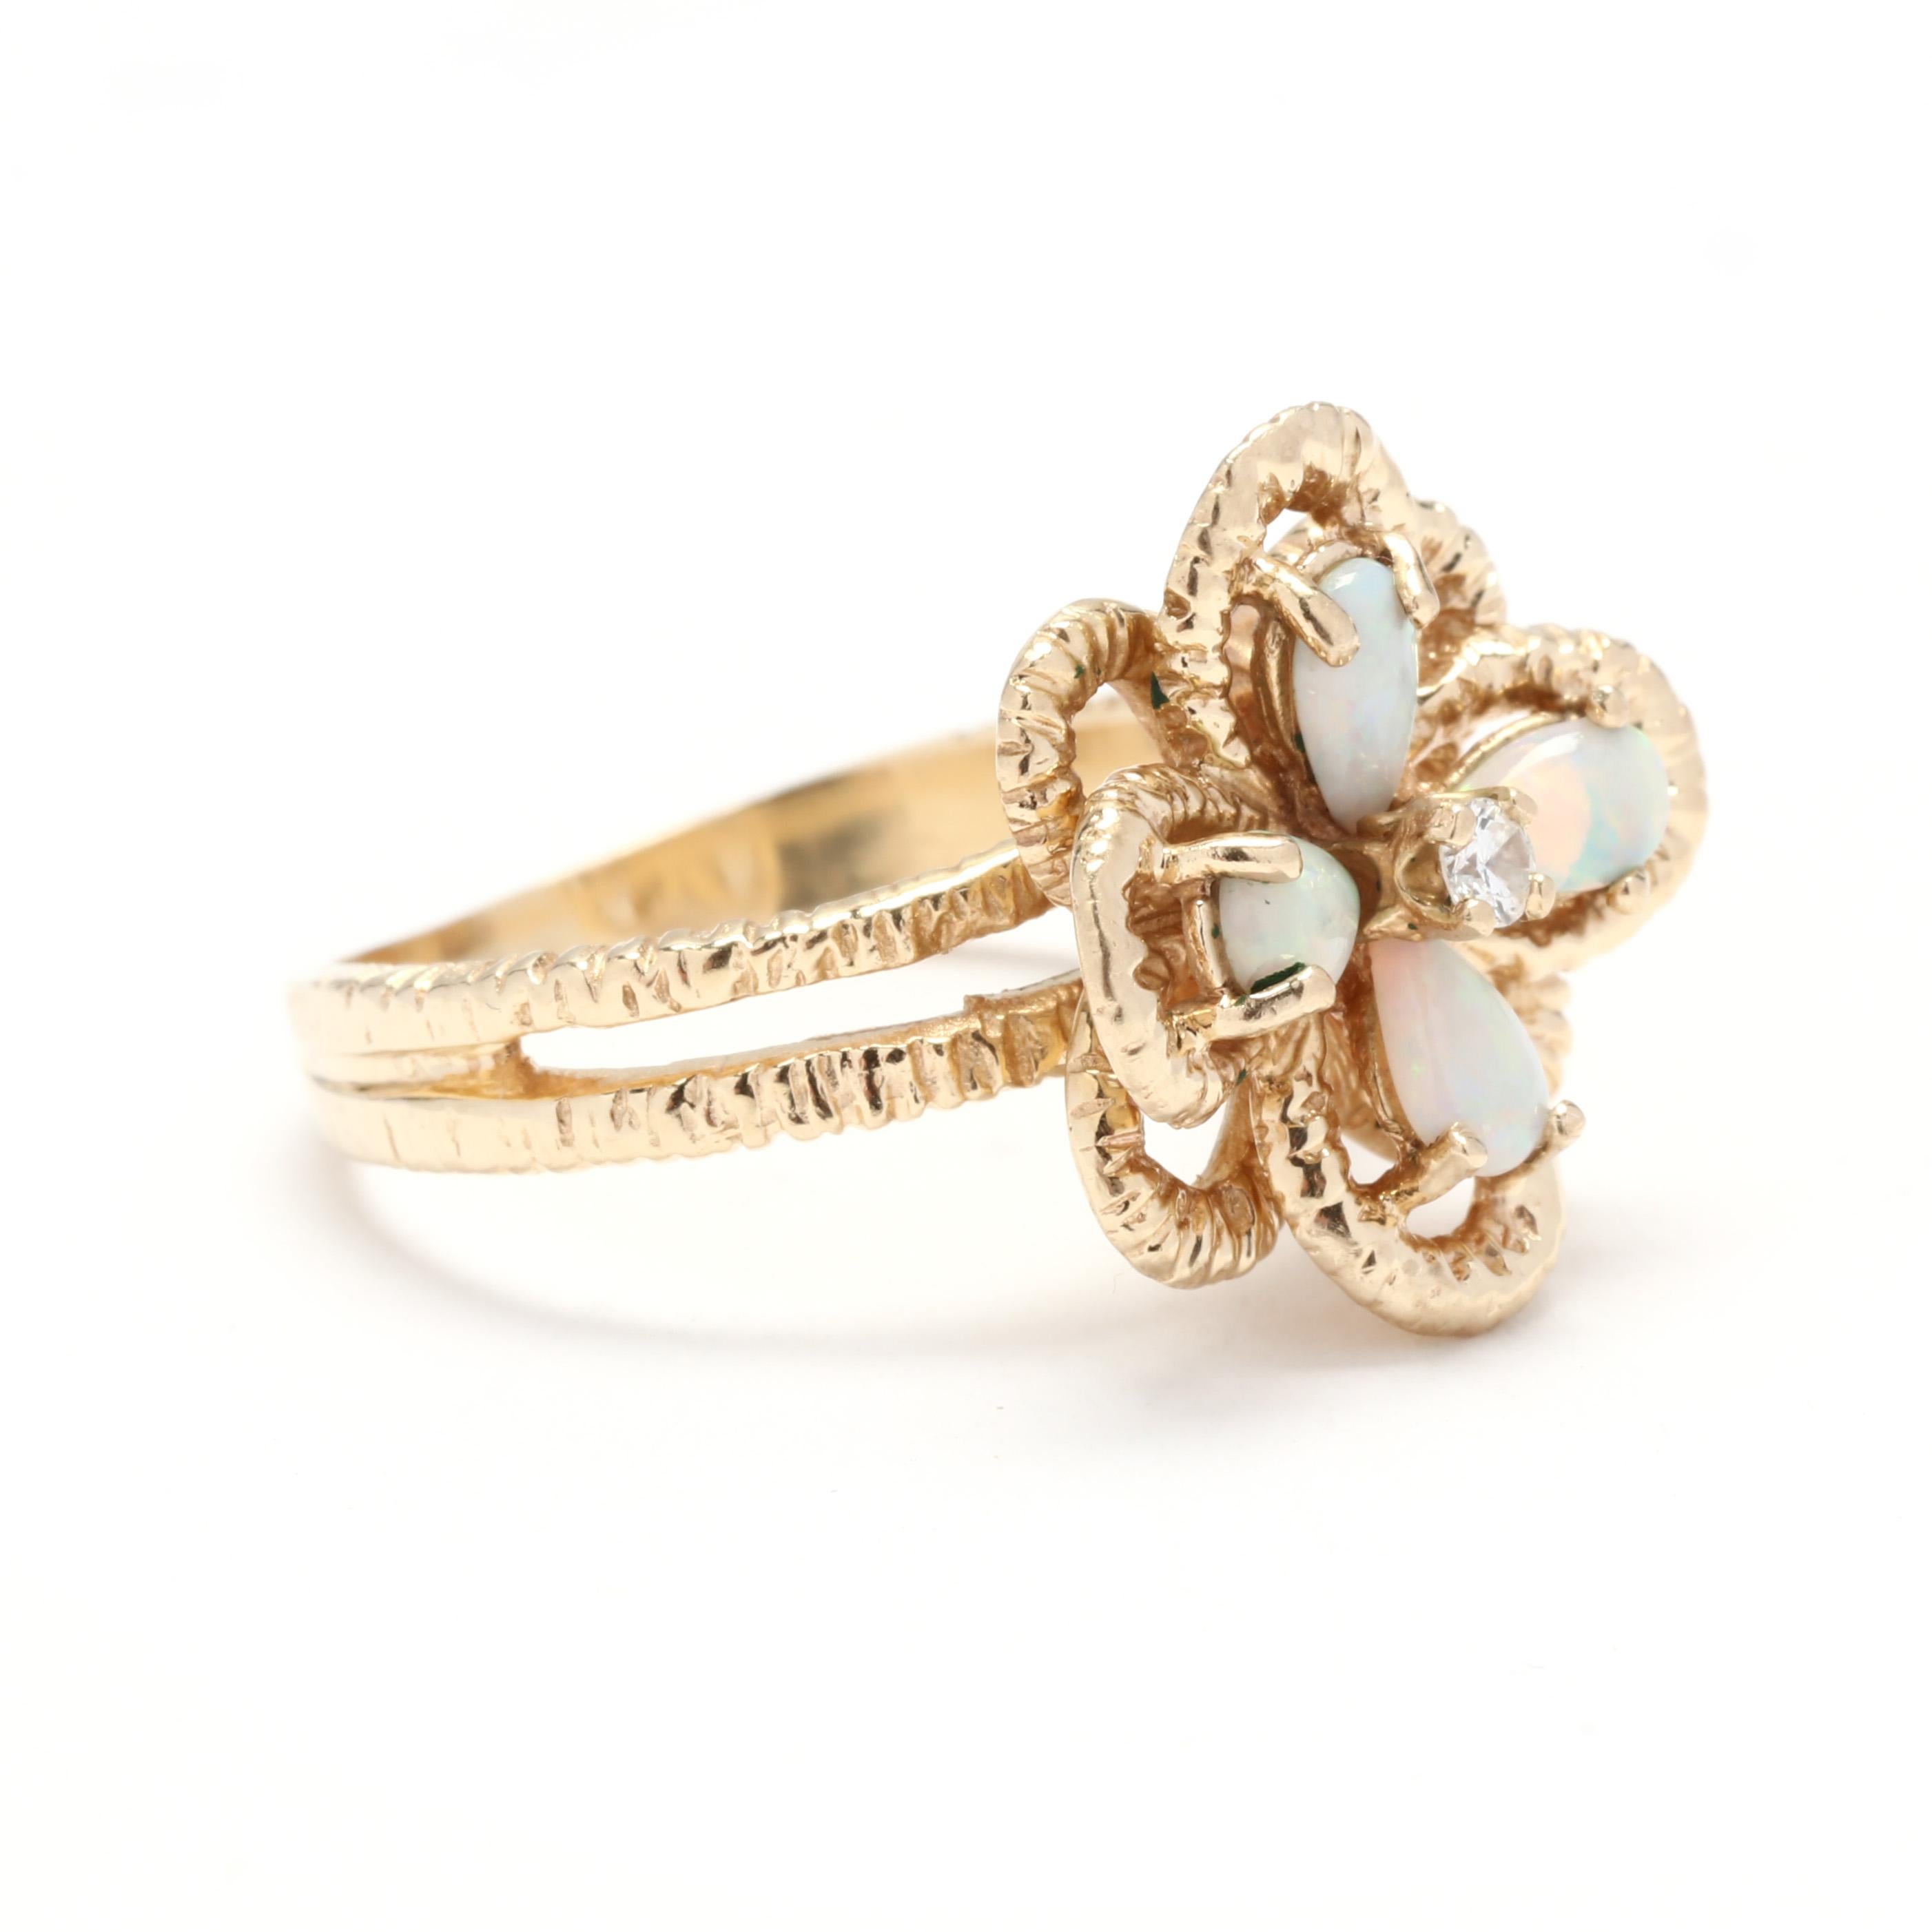 A 1970's 14 karat yellow gold opal and diamond flower cocktail ring. This ring features four prong set, pear cabochon cut opals weighing approximately .48 total carats centered around a round brilliant cut diamond weighing approximately .04 carat,